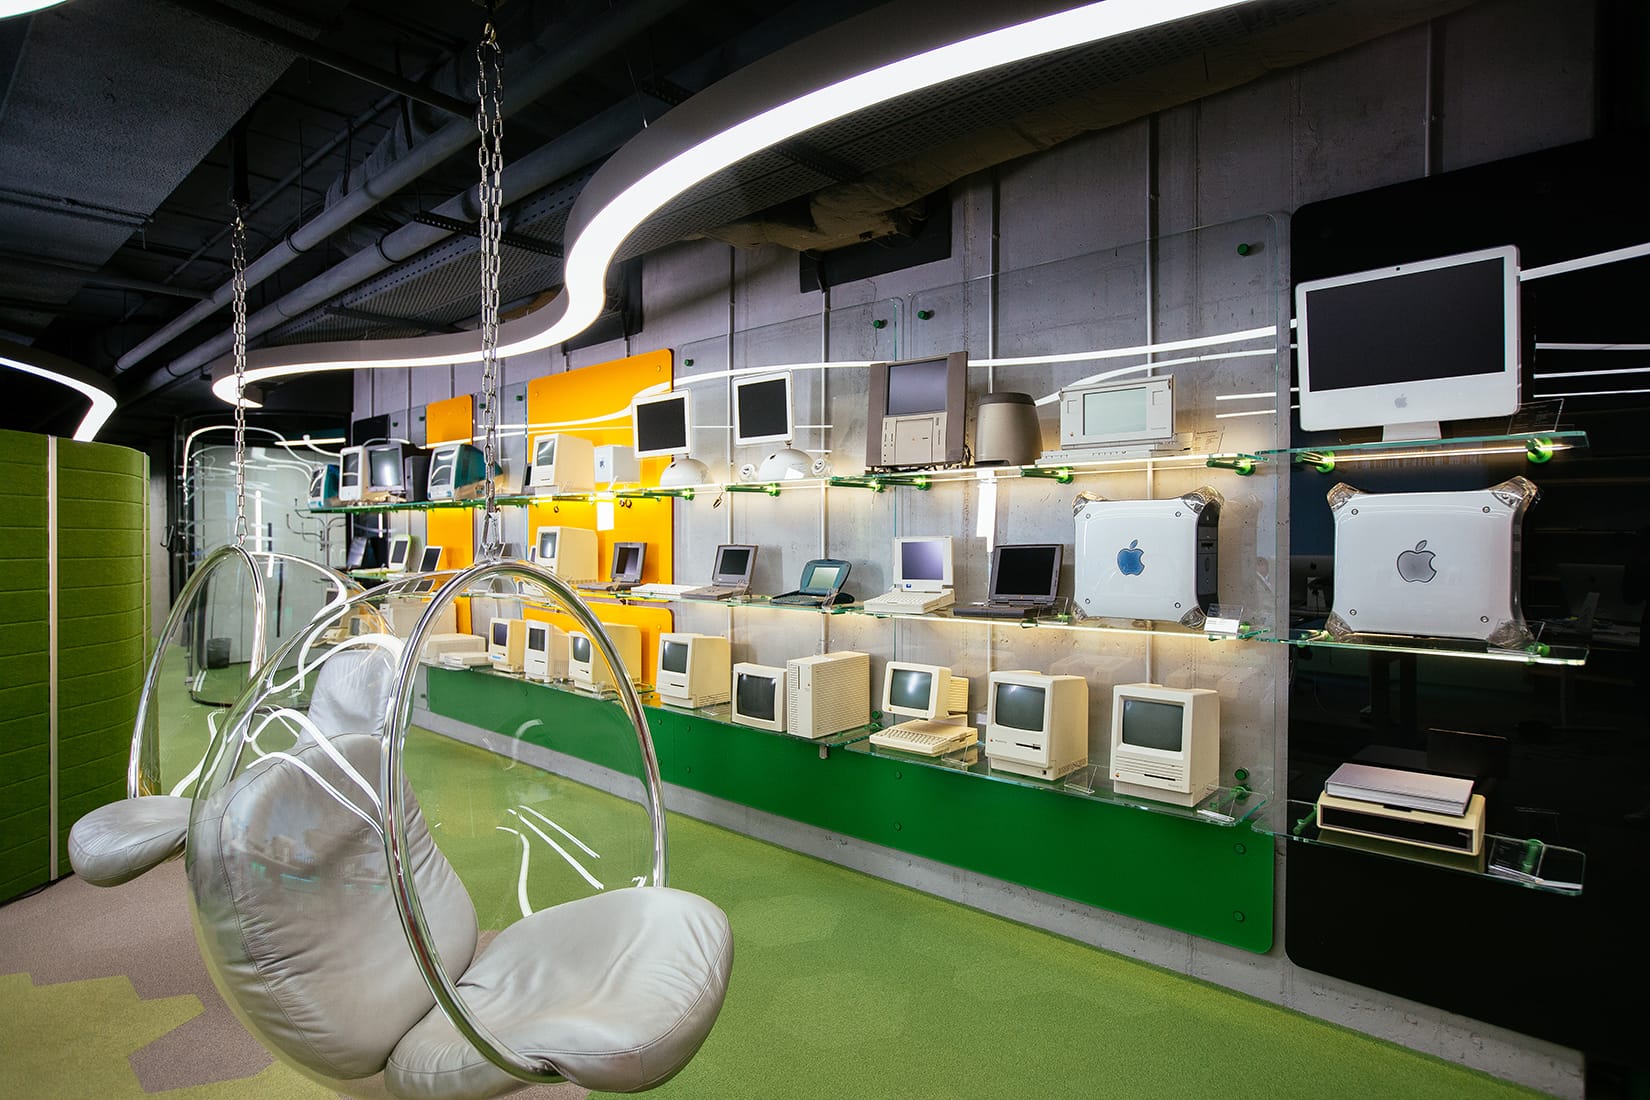 MacPaw's Kyiv HQ is home to an extensive Apple museum